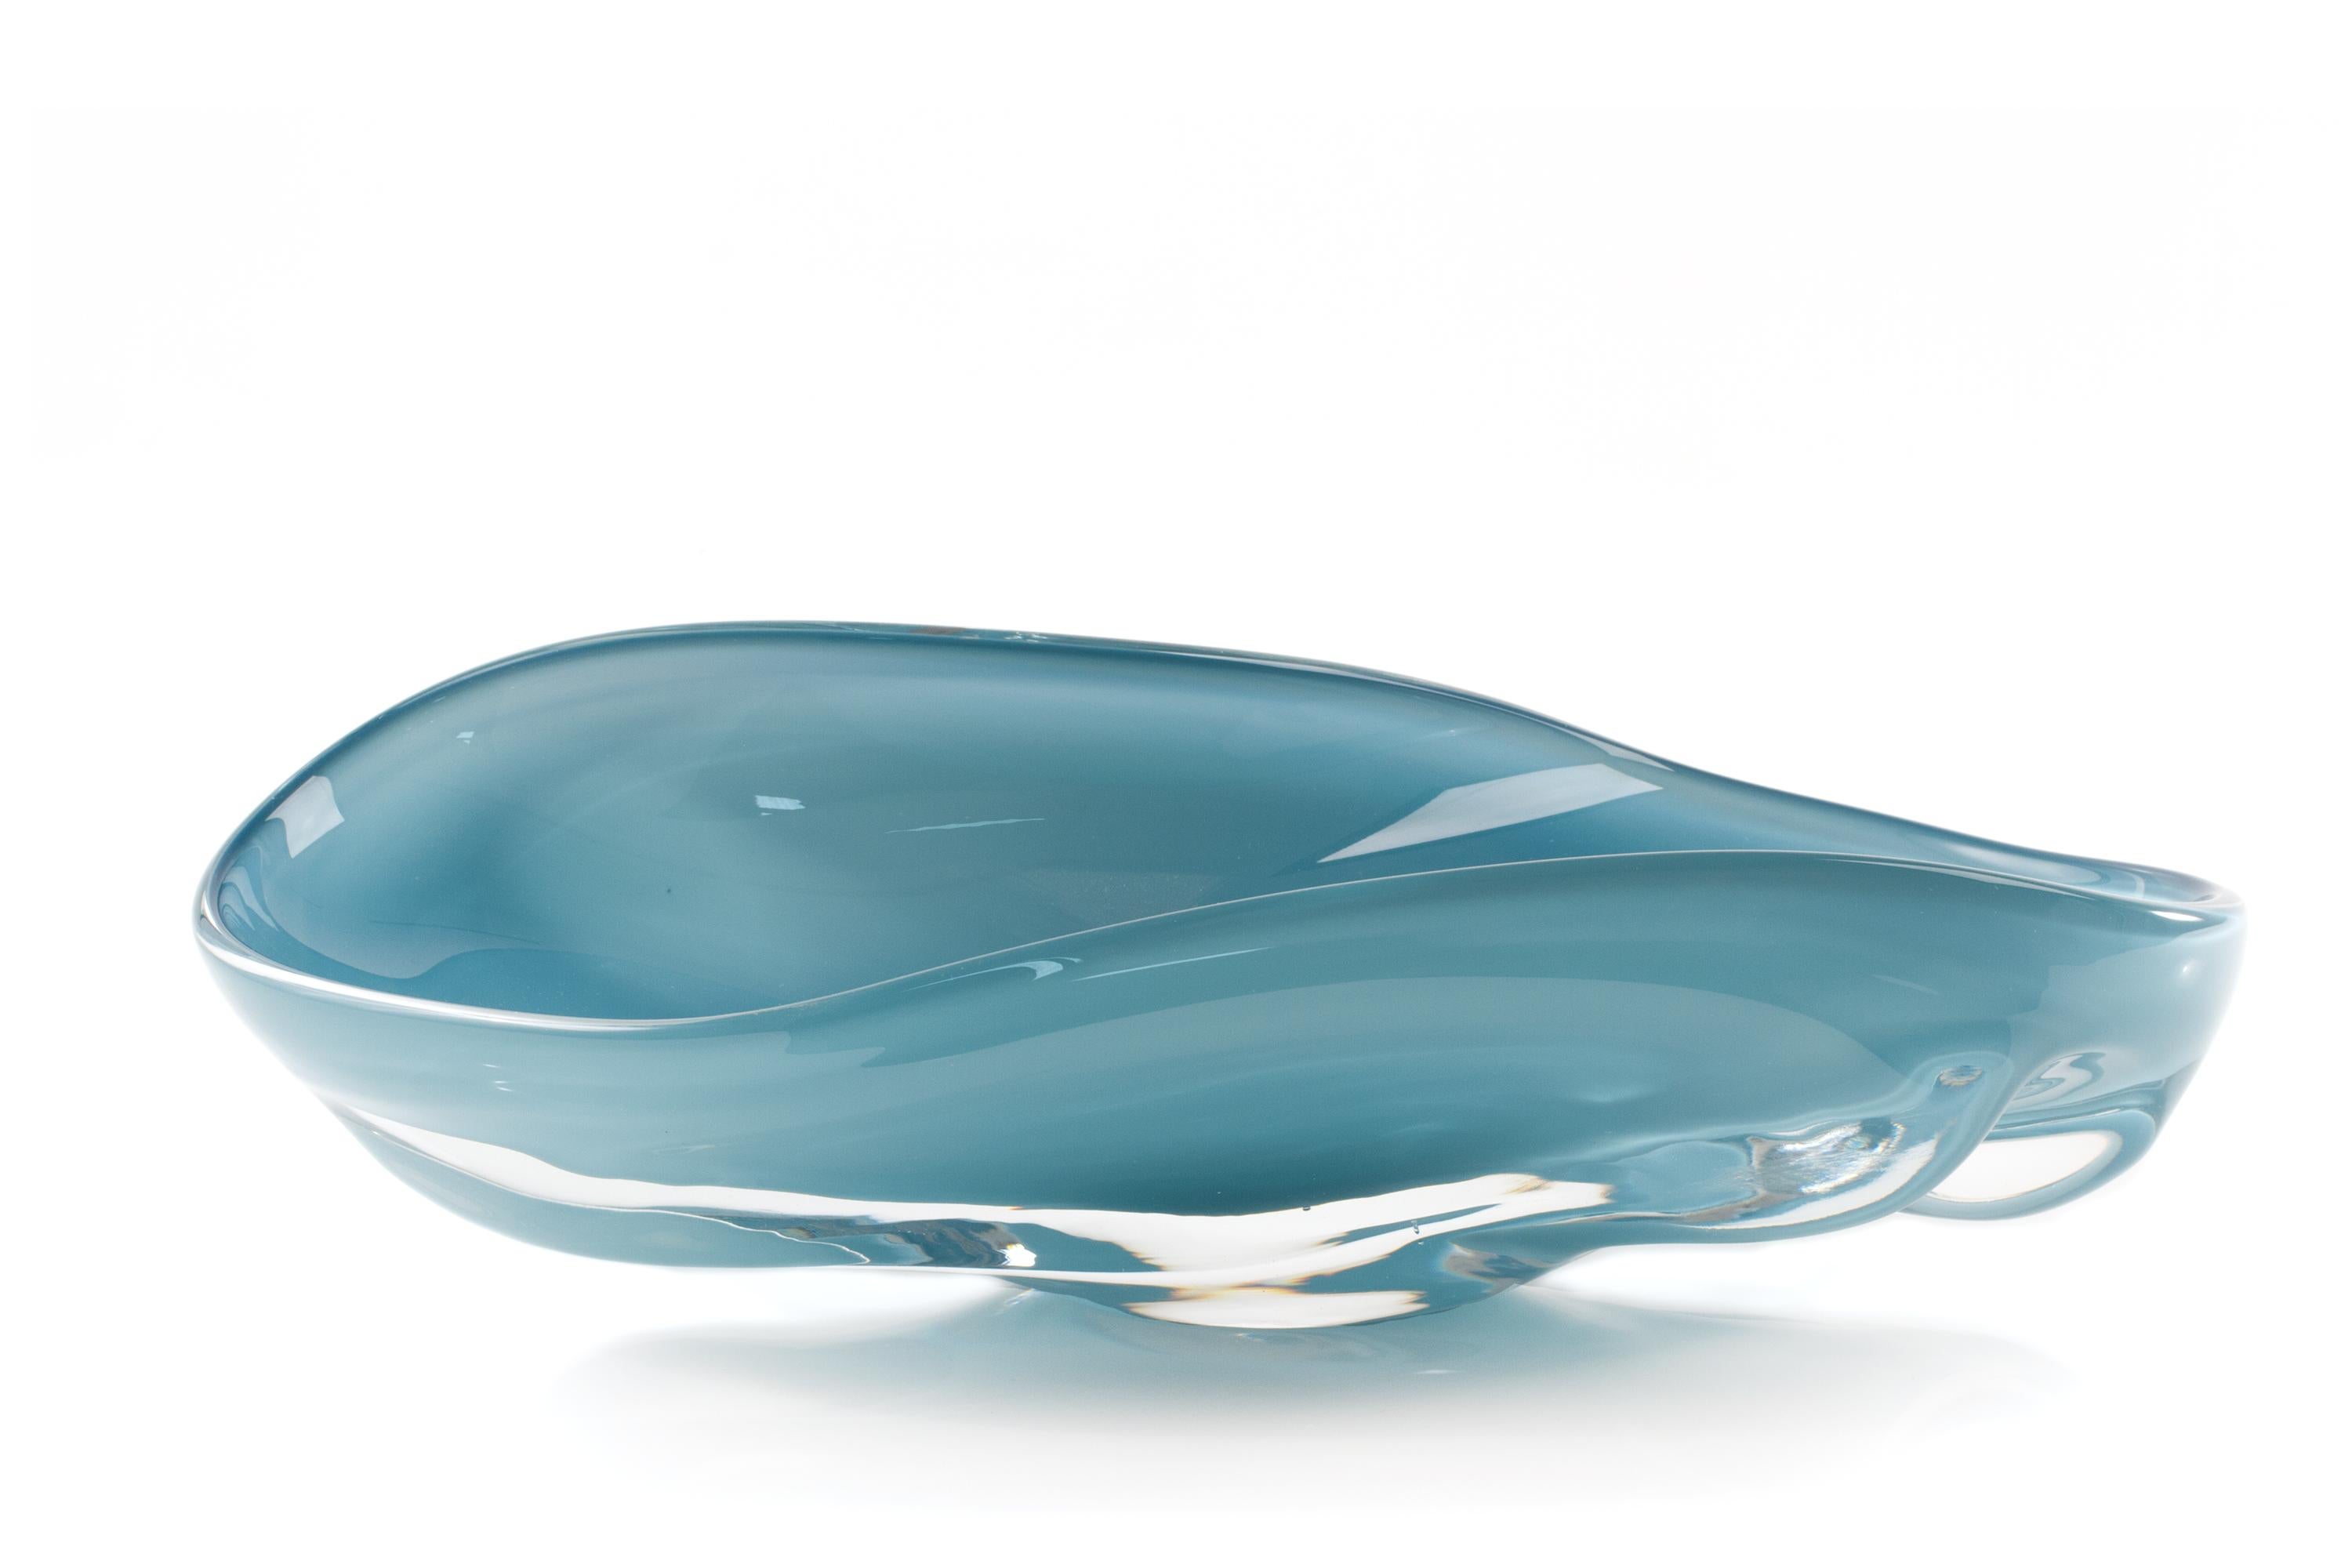 Long Blue Sway Bowl by SkLO
Dimensions: D 51 x W 23 x H 13 cm
Materials: glass
Available in high (25x14cm) and long (51x23x13cm). Available in blue, gray, lagoon, olivin, pink and white.

Asymmetrical organic bowls with amazing depth of color